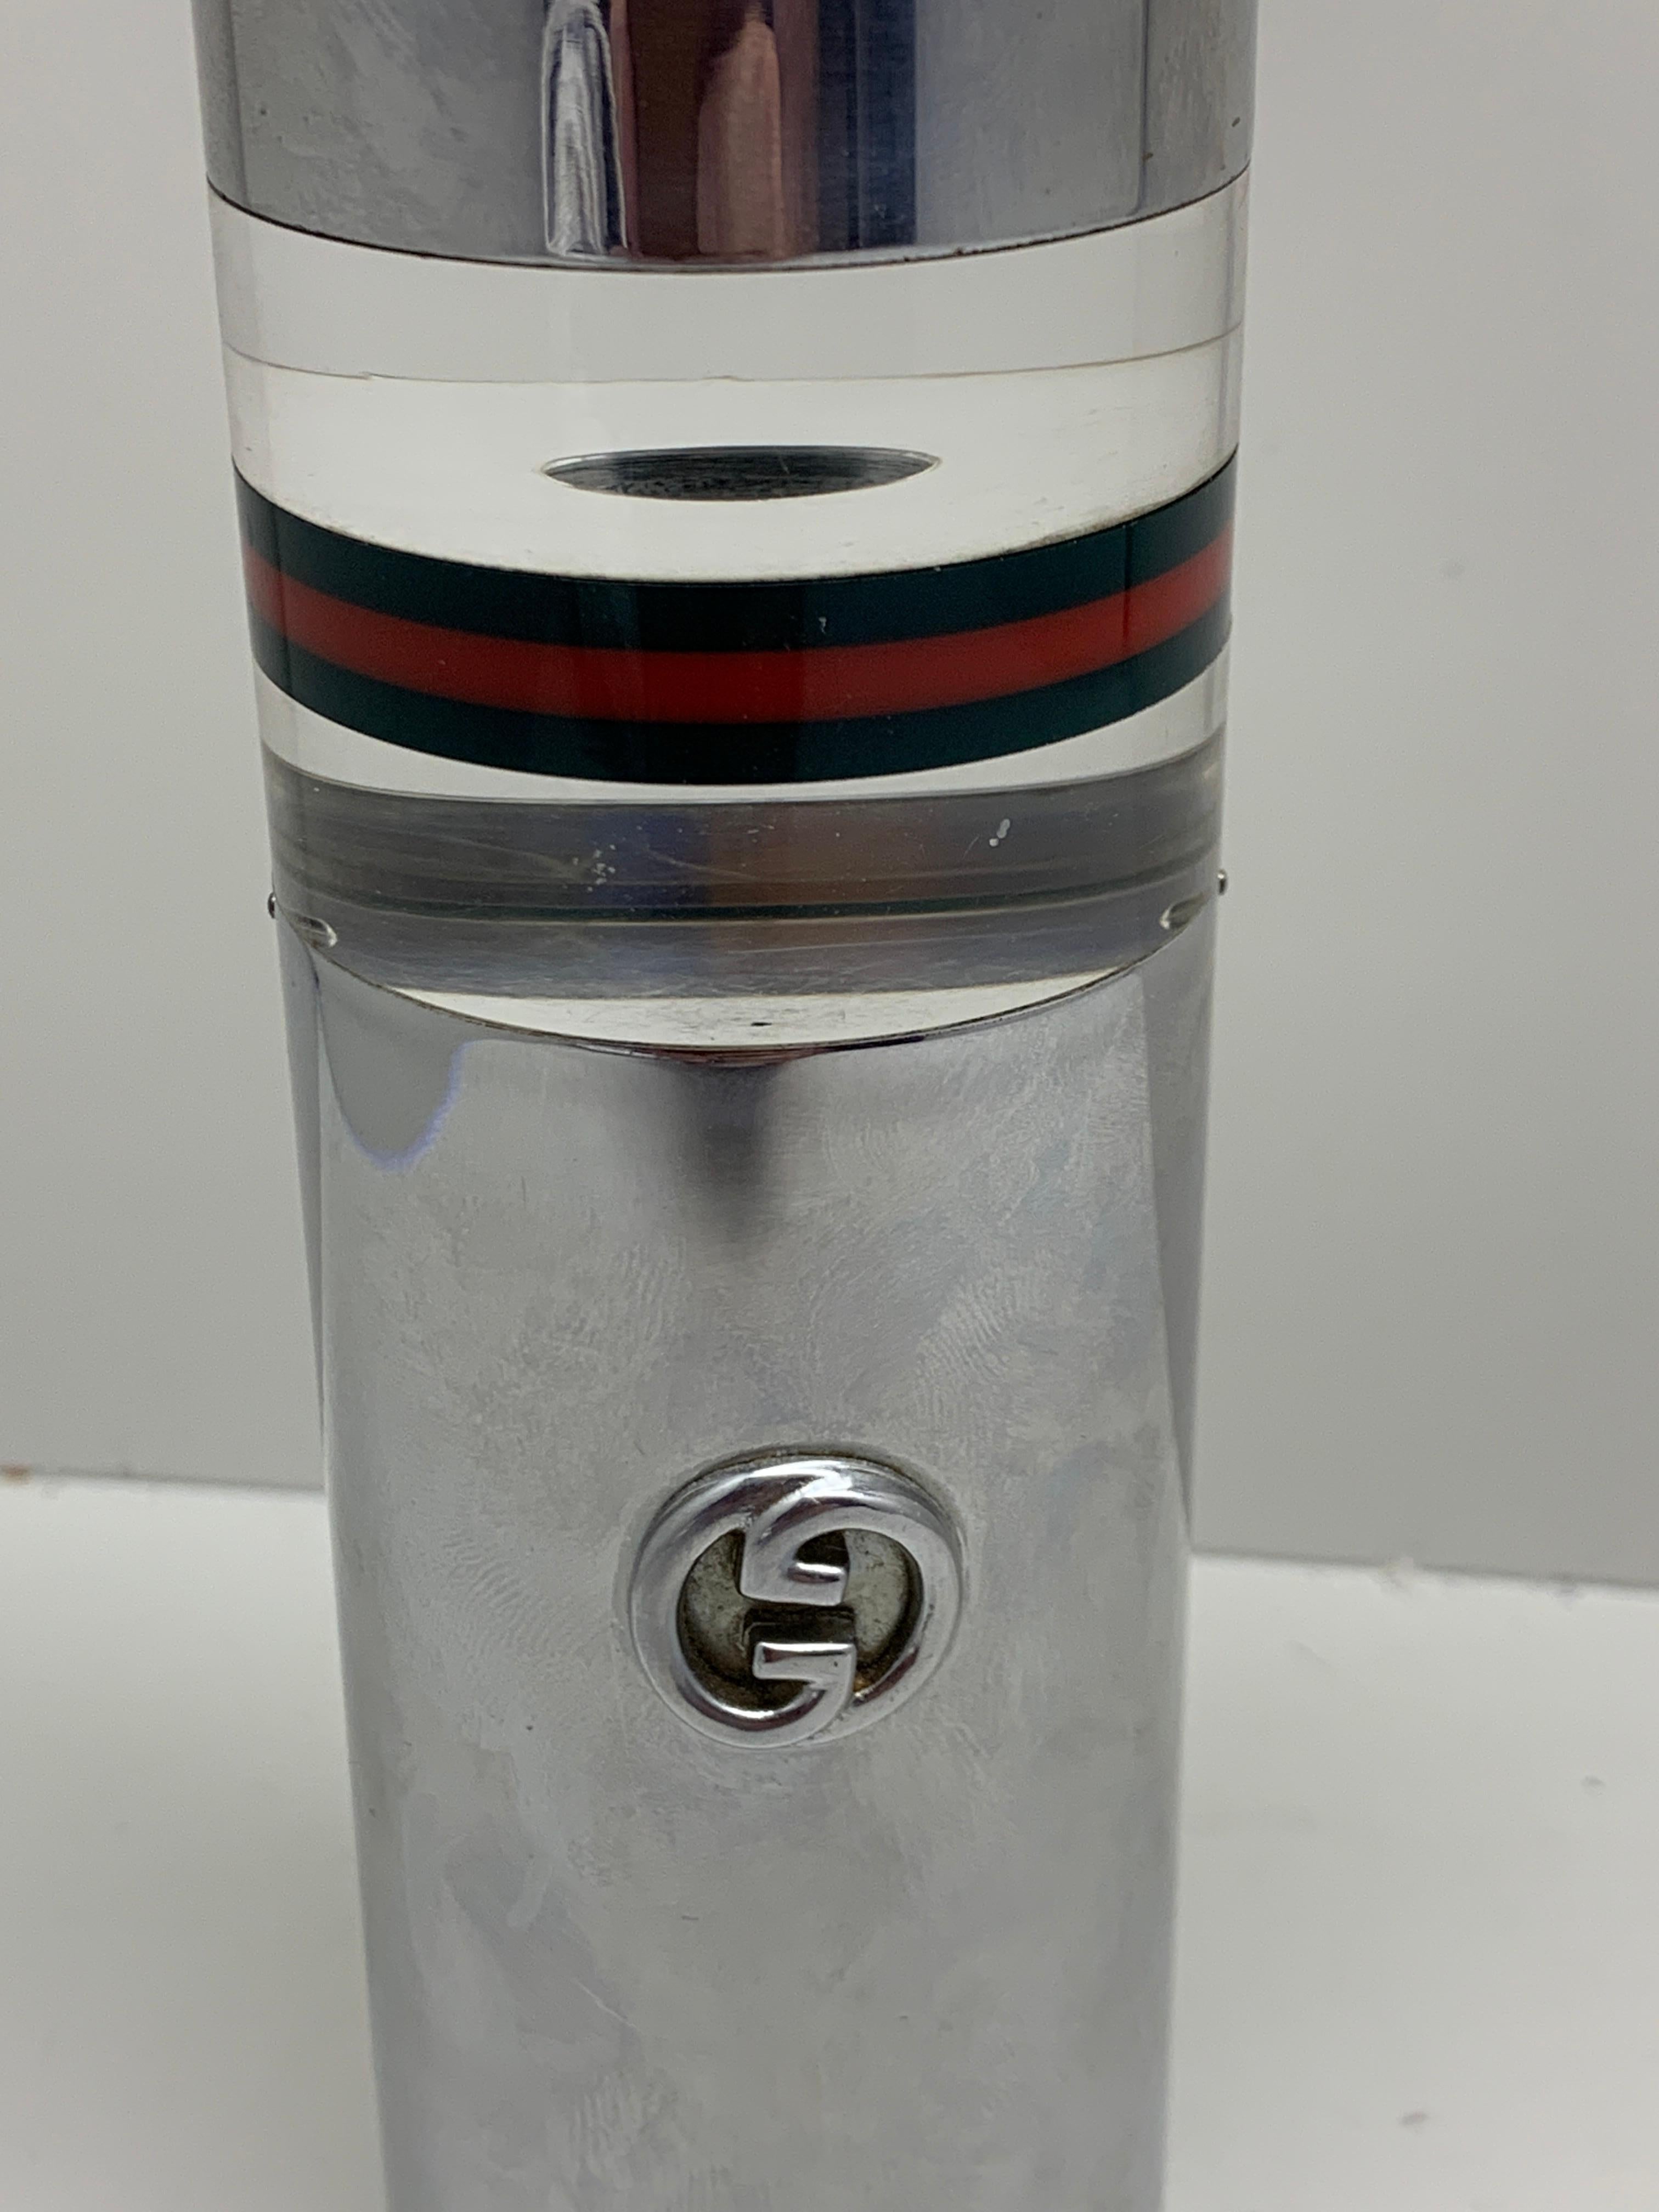 A vintage 1970s Gucci Italian table lighter in Lucite acrylic and metal chrome. It is signed Gucci on the base and has a clever hidden space for cigarettes or whatever you wish tucked away. It release with a twist and has a Lucite push rod. That is